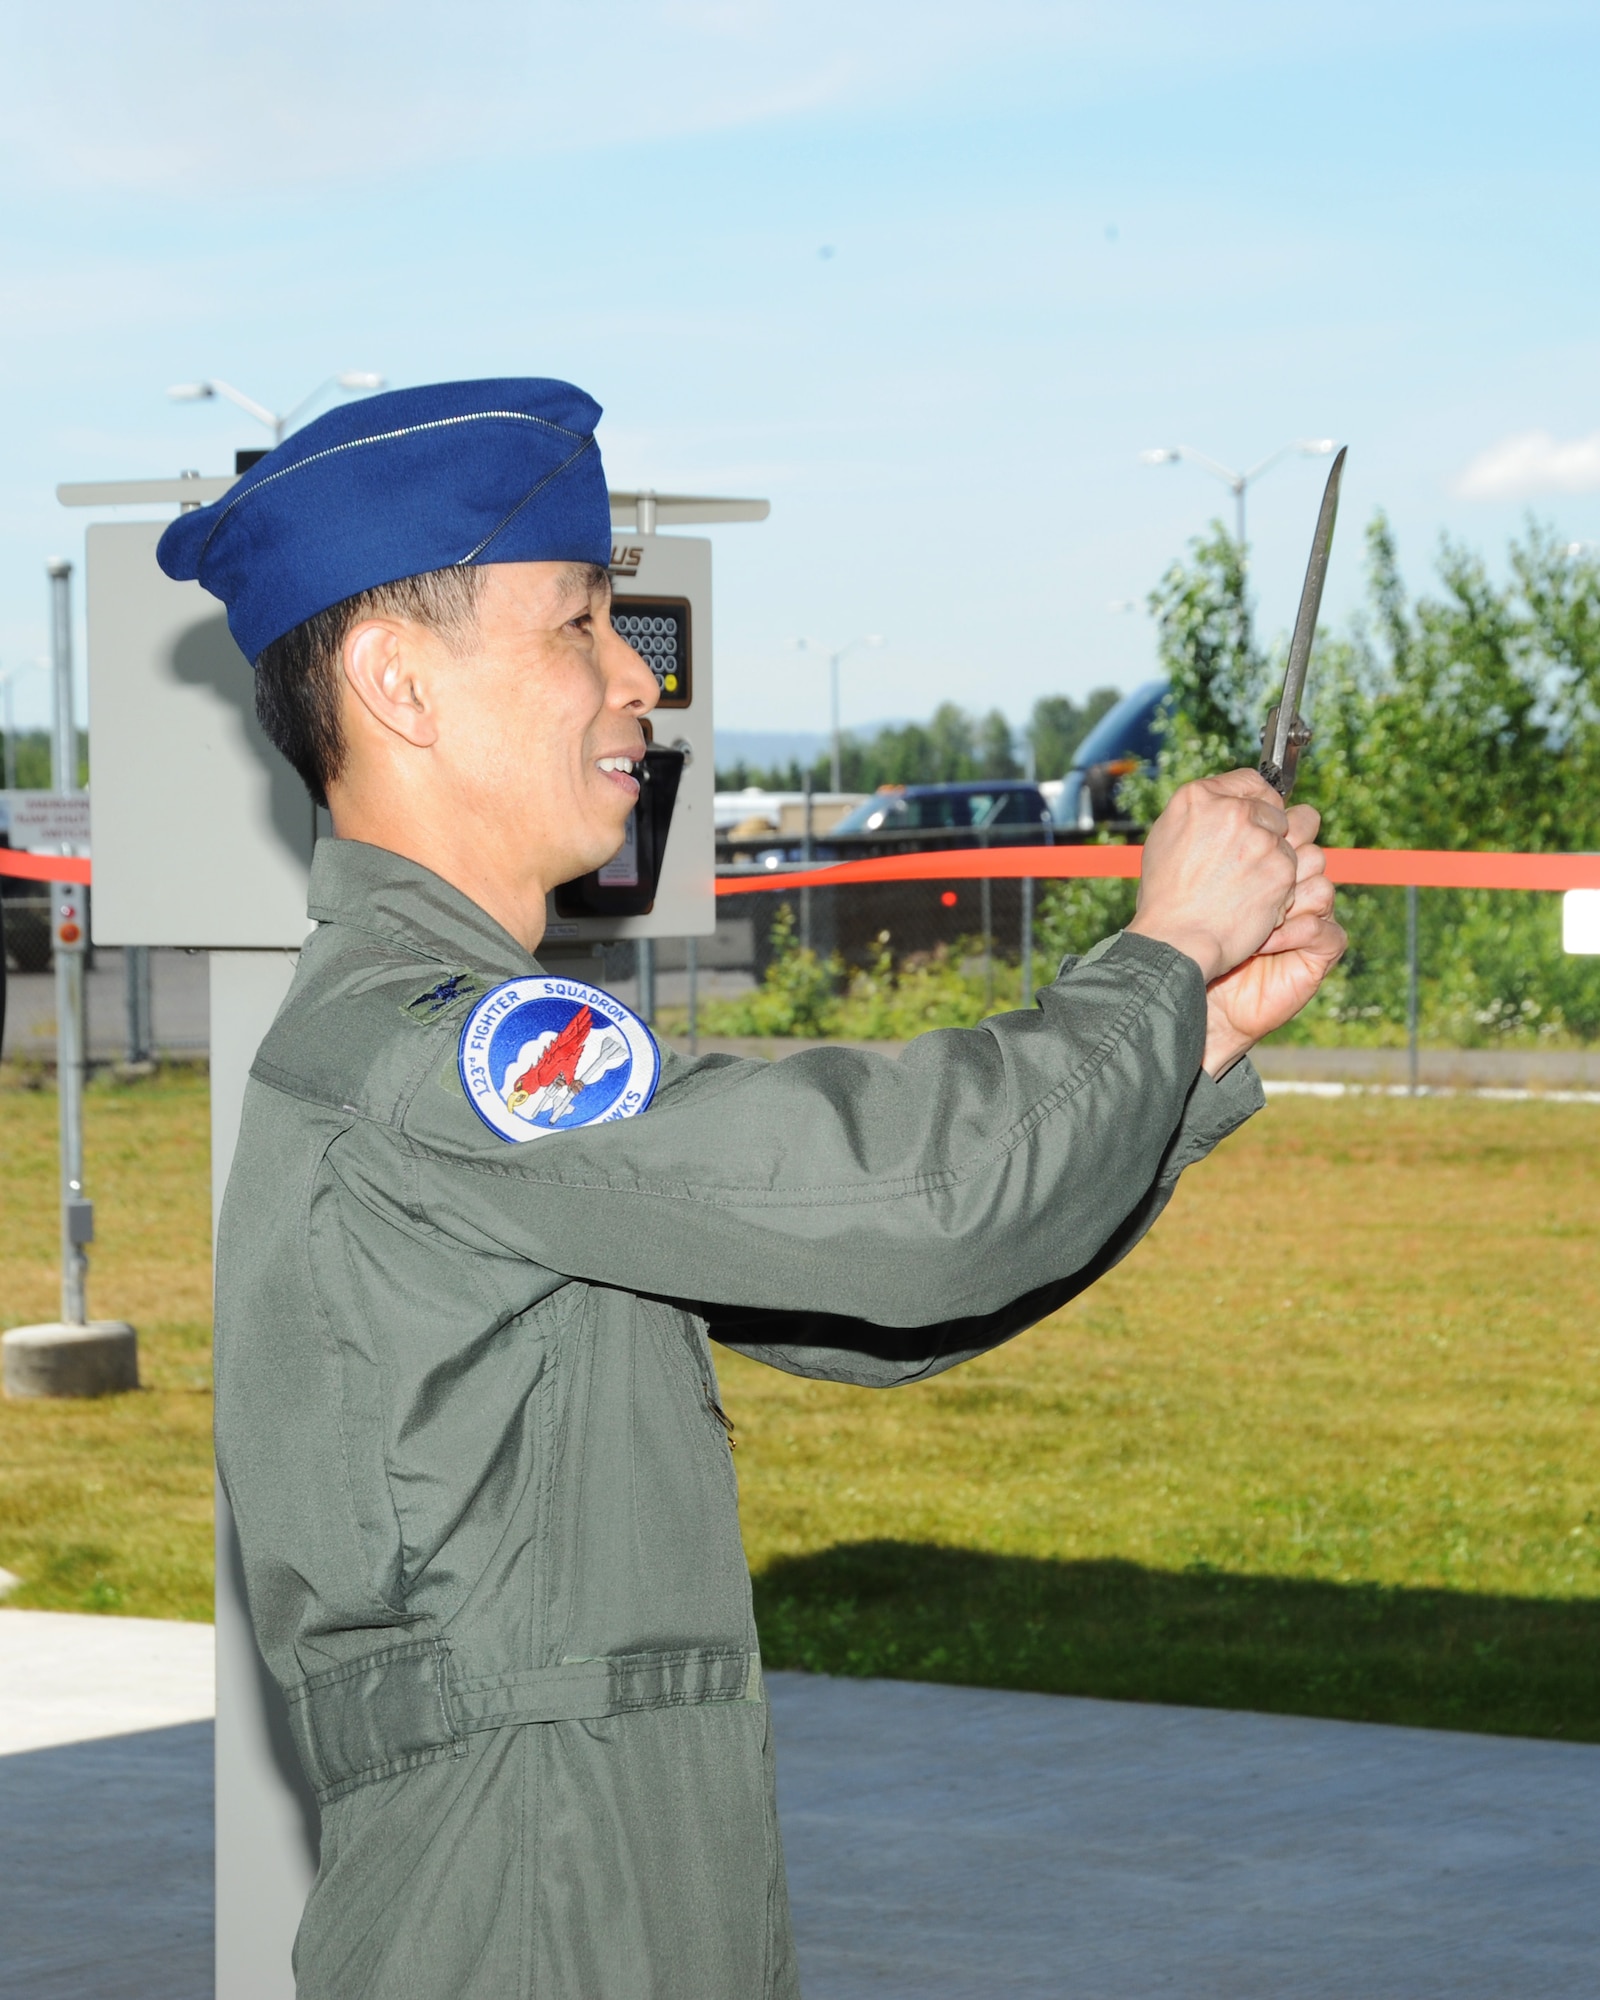 Col. Jeff Hwang, 142nd Fighter Wing Vice Commander, cuts the tape to officially open the new base Service Station, June 5, 2014 at the Portland Air National Guard Base.  (Air National Guard photo by Tech. Sgt. John Hughel, 142nd Fighter Wing Public Affairs/Released)